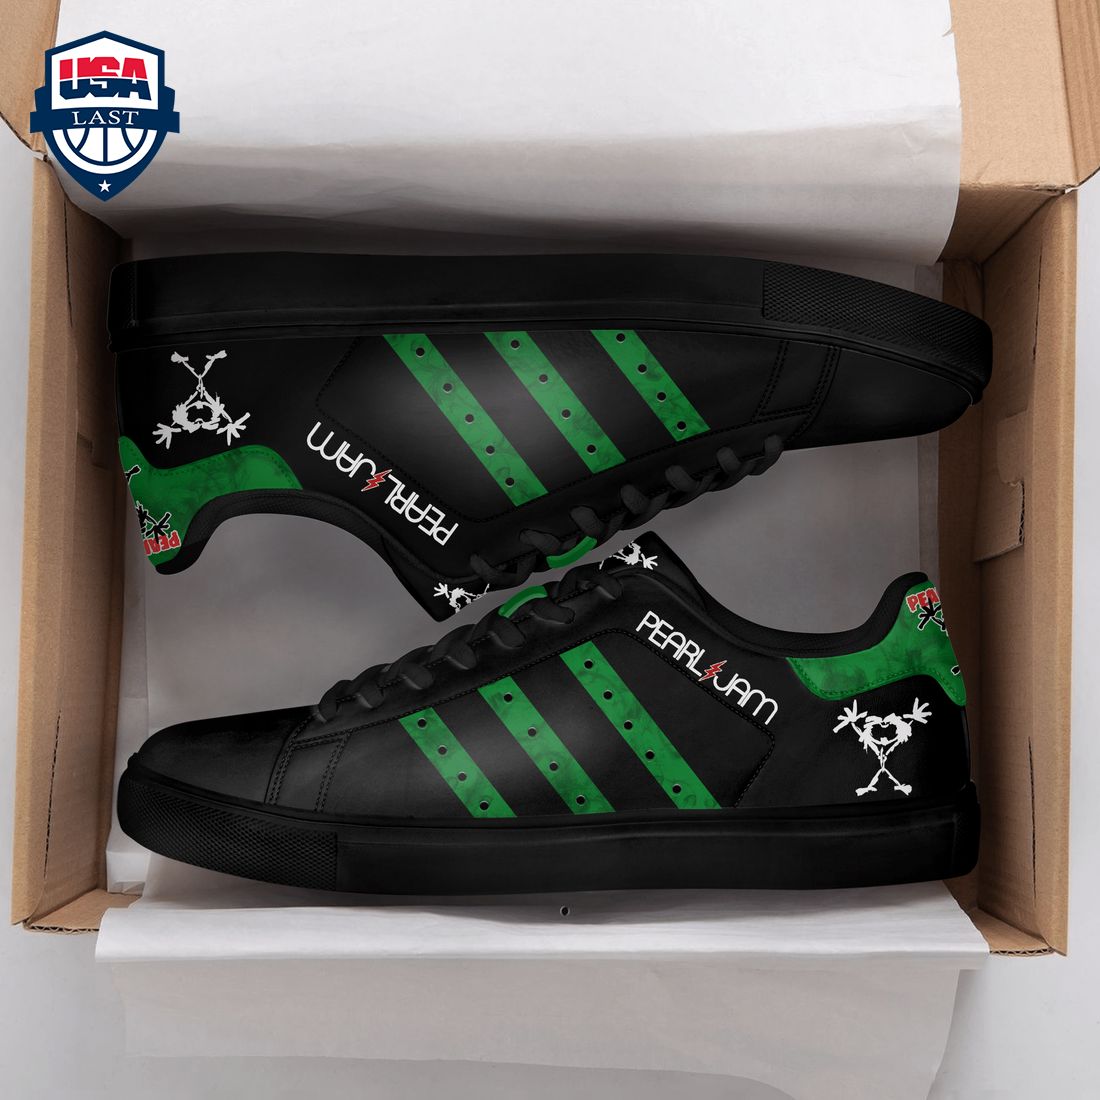 pearl-jam-green-stripes-style-2-stan-smith-low-top-shoes-1-ma7n2.jpg